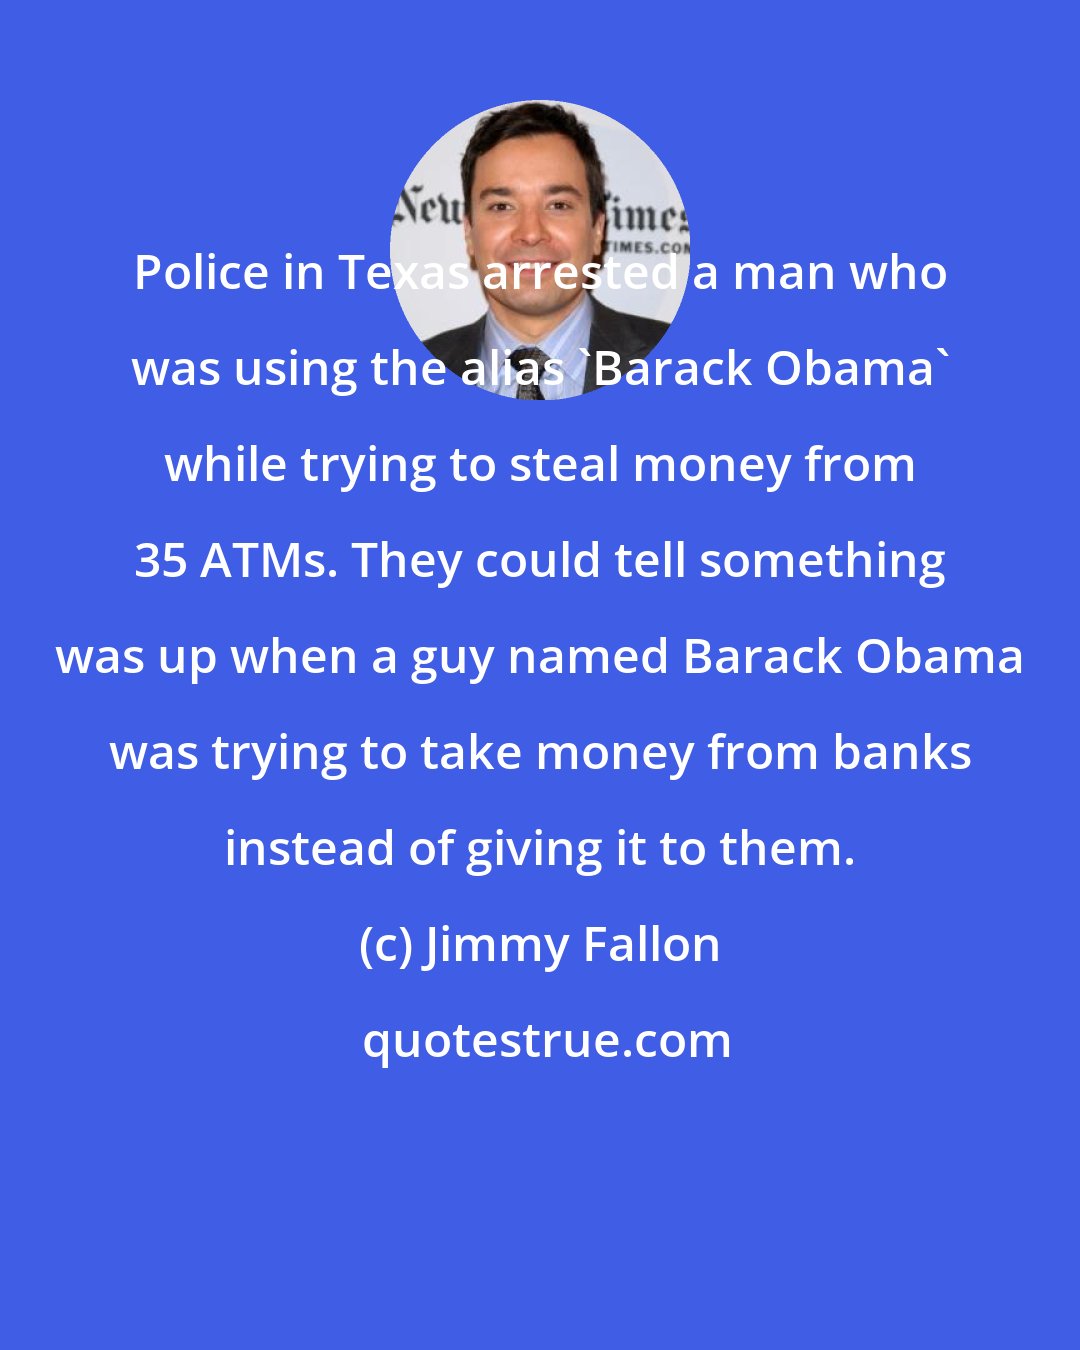 Jimmy Fallon: Police in Texas arrested a man who was using the alias 'Barack Obama' while trying to steal money from 35 ATMs. They could tell something was up when a guy named Barack Obama was trying to take money from banks instead of giving it to them.